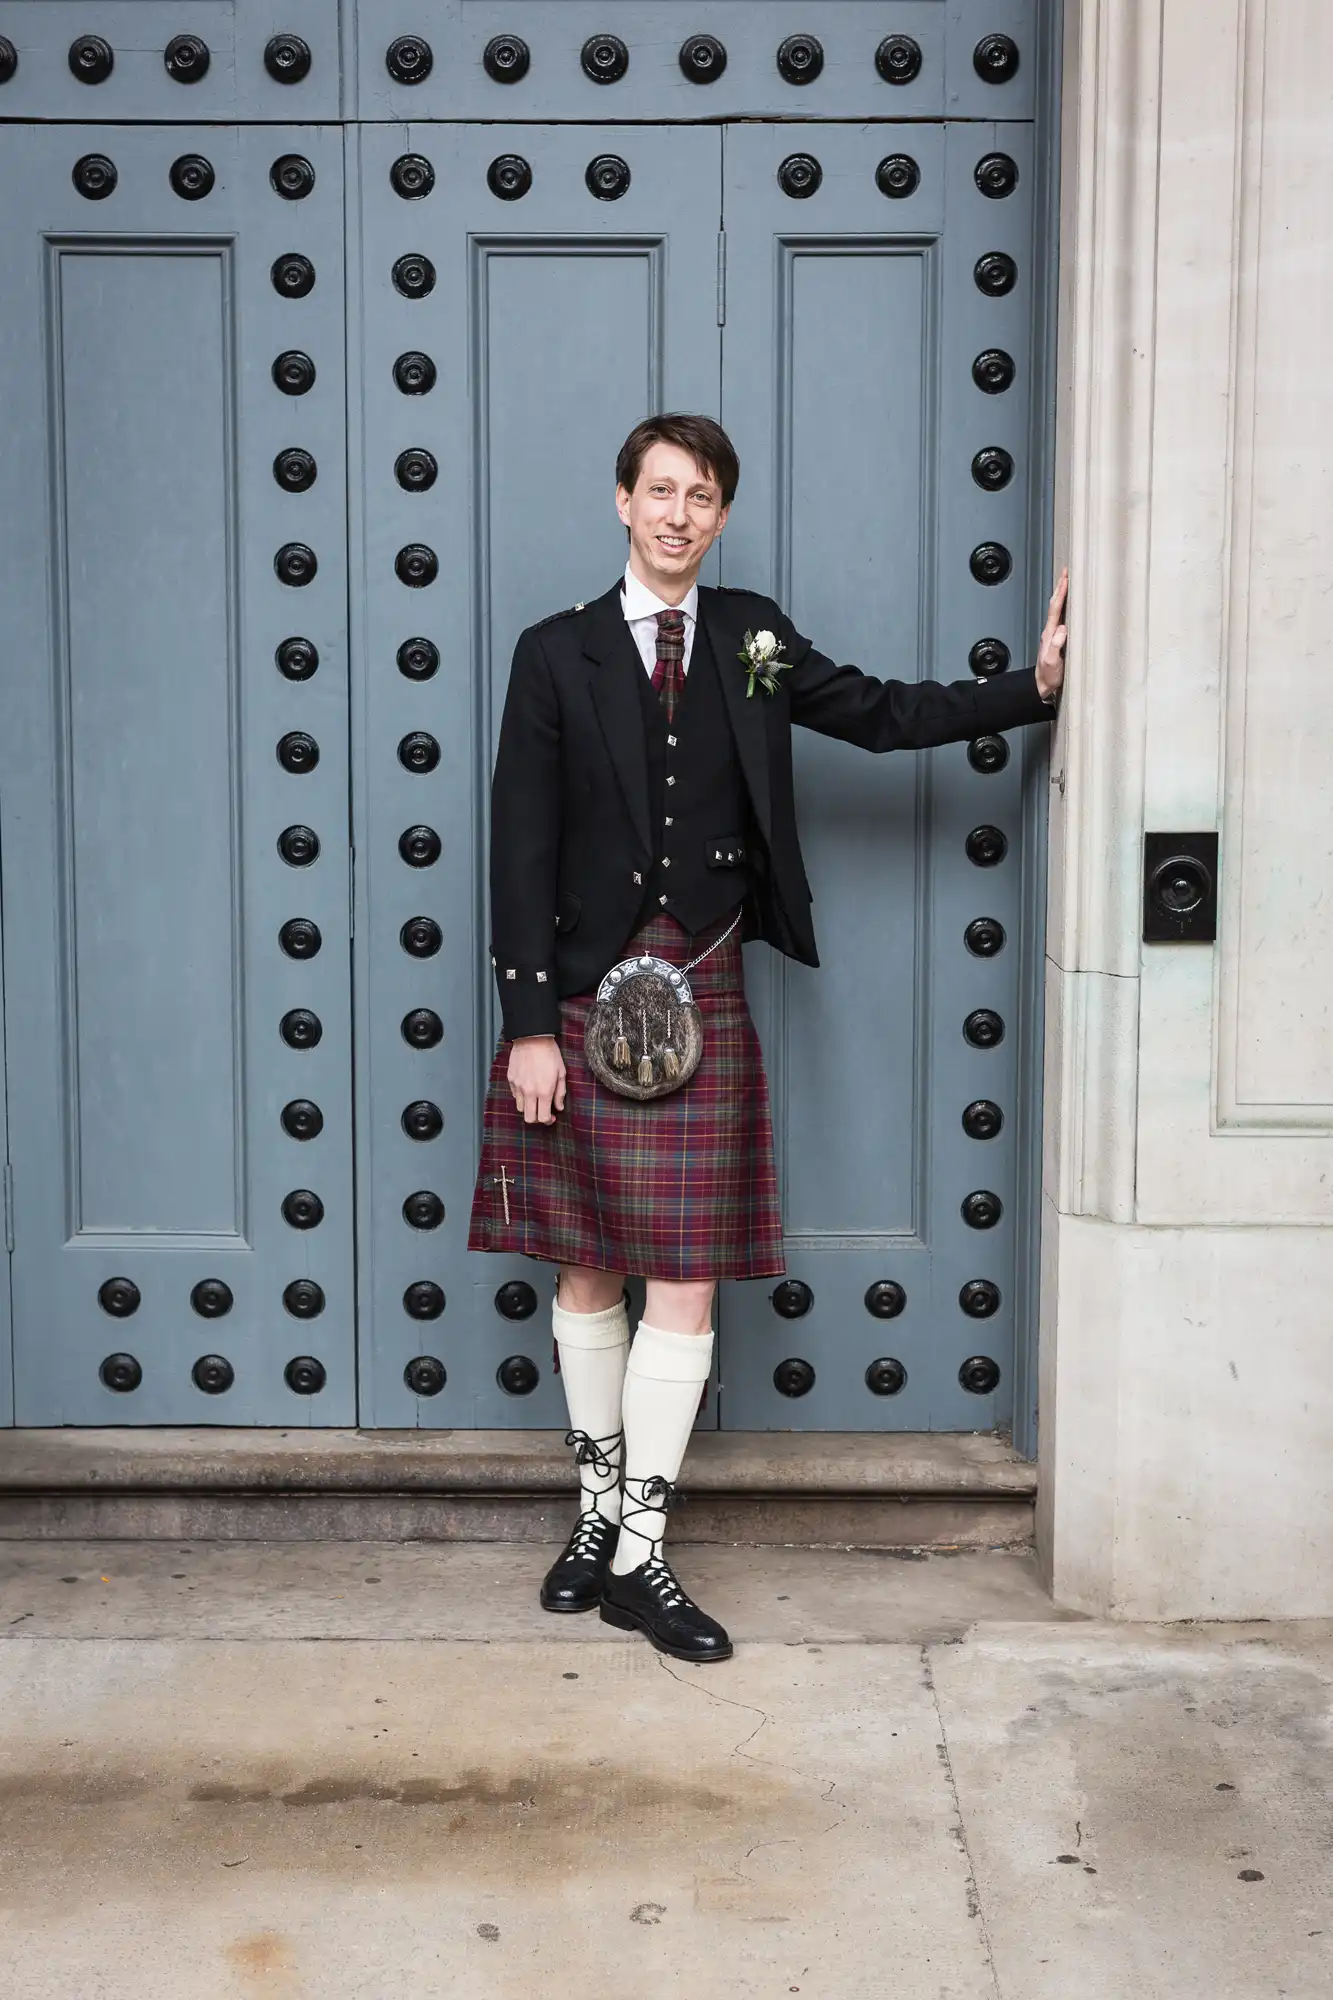 A man in traditional scottish attire, including a kilt and sporran, stands by a large blue door, smiling and holding the door handle.